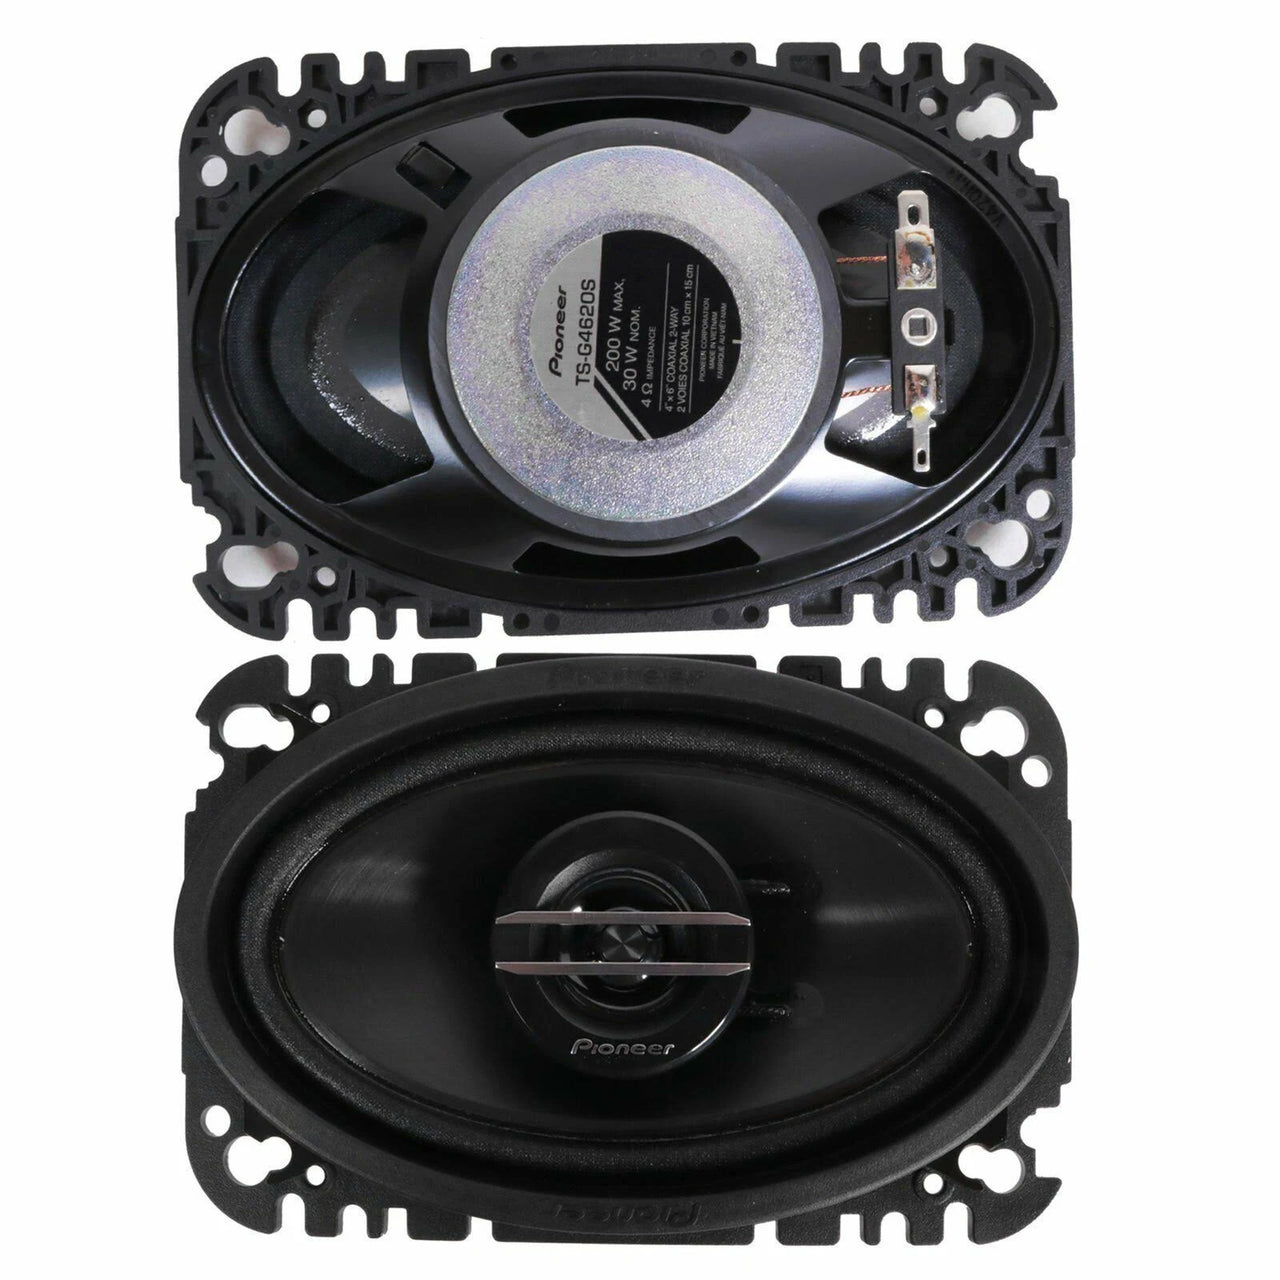 Pioneer TS-G4620S 400W Max (60W RMS) 4" x 6" G-Series 2-Way Coaxial Car Speakers